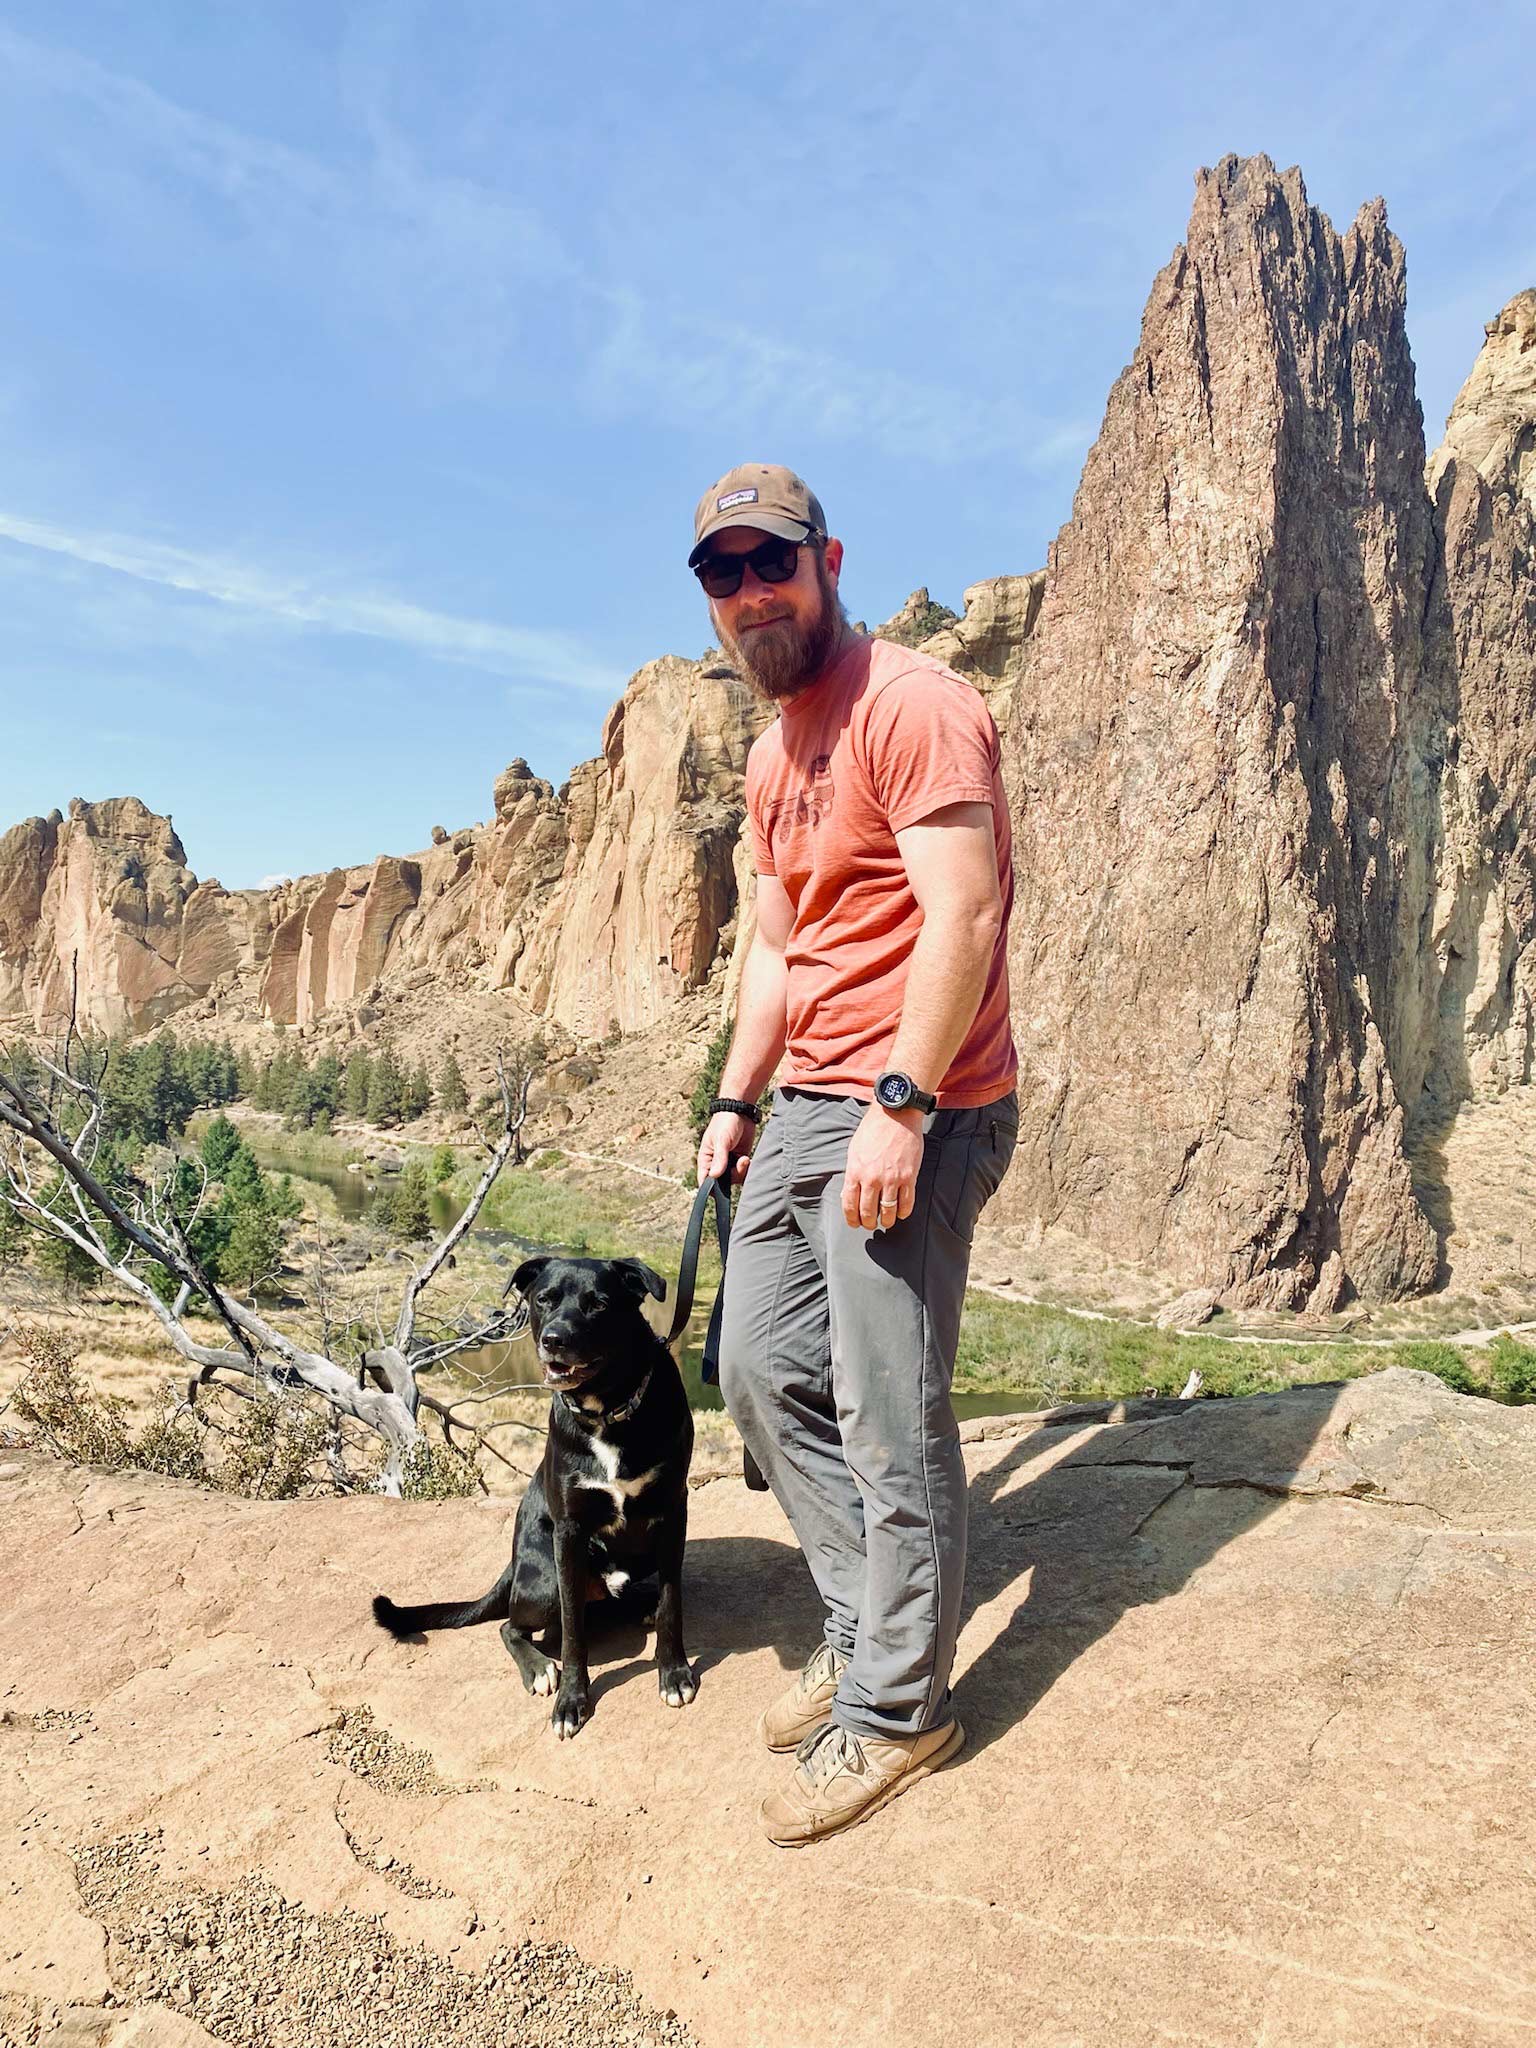 A man in an orange shirt, sunglasses, gray pants, and a watch holding a dog in front of a rock spire in the background